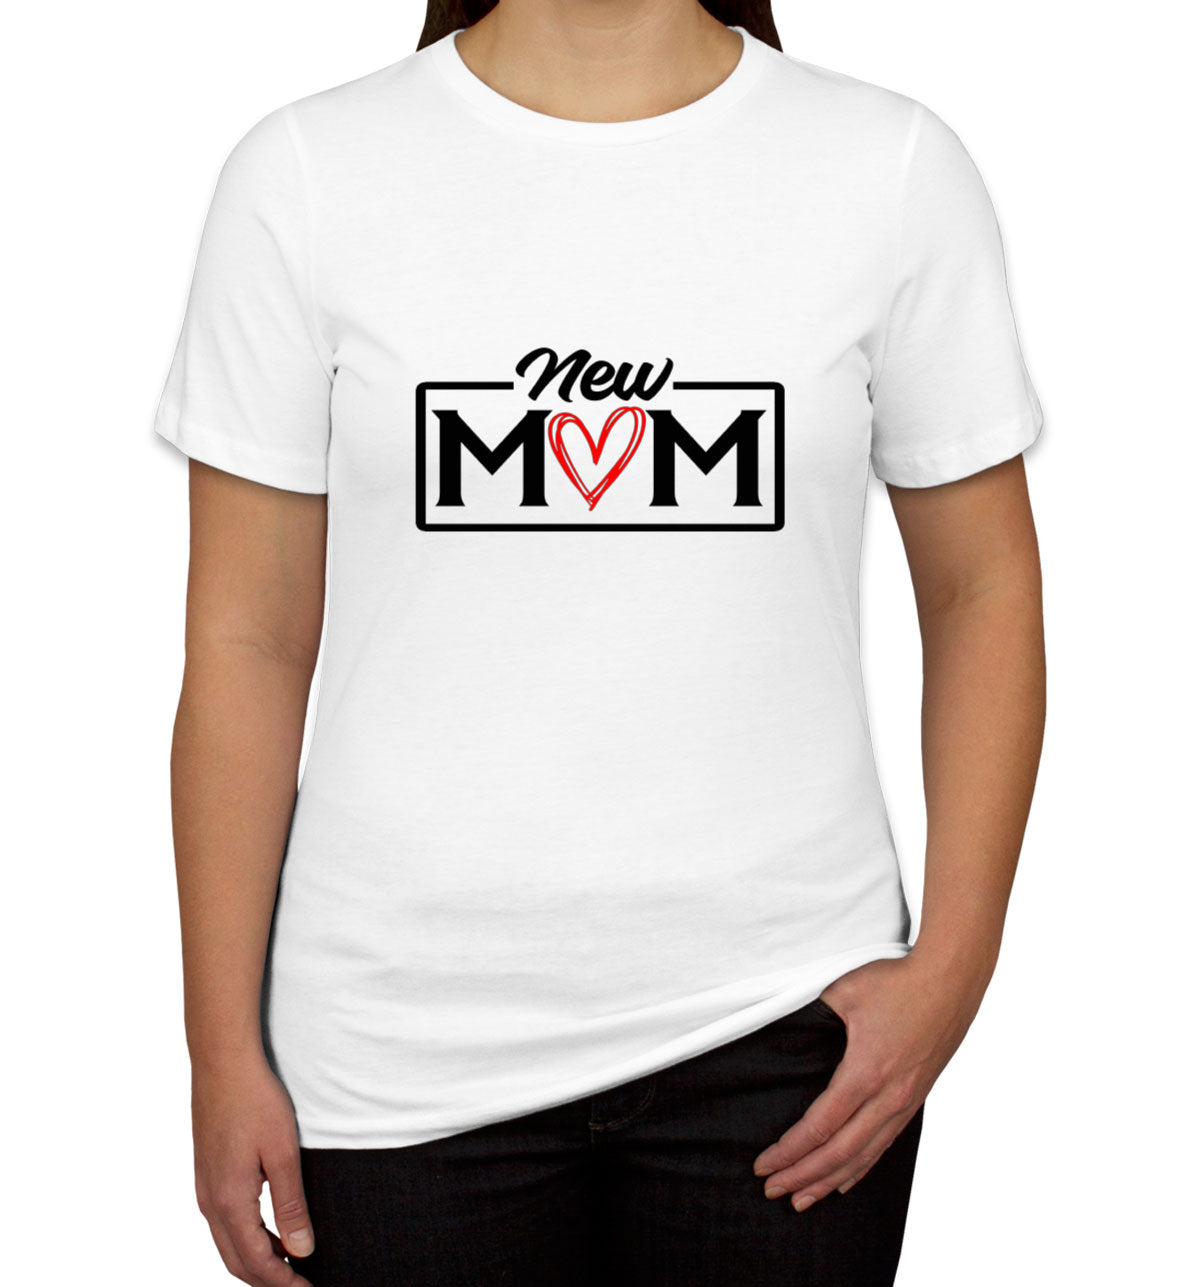 New Mom Mother's Day Women's T-shirt